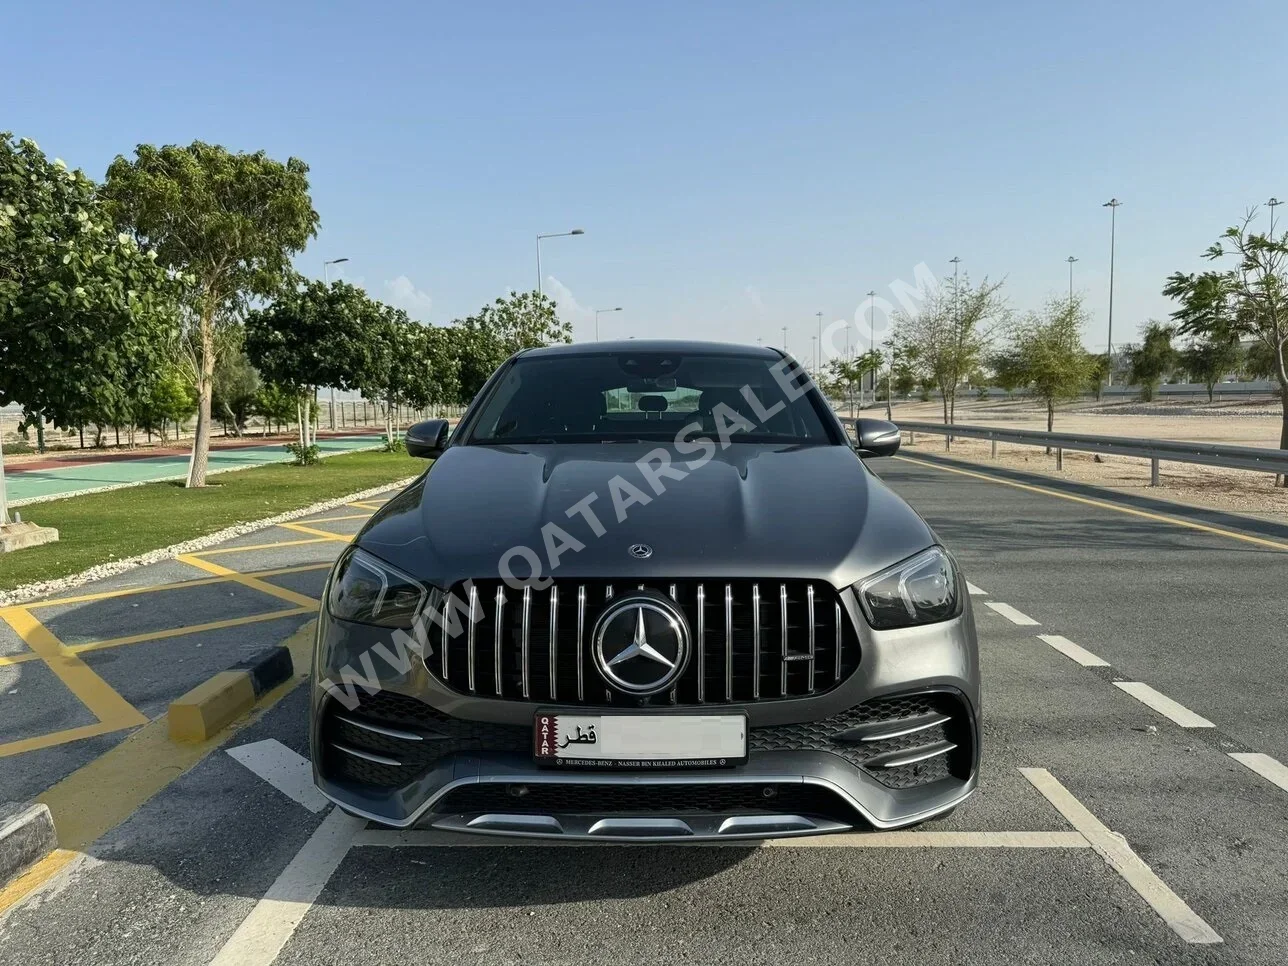 Mercedes-Benz  GLE  53 AMG Coupe  2020  Automatic  100,000 Km  6 Cylinder  All Wheel Drive (AWD)  Coupe / Sport  Silver